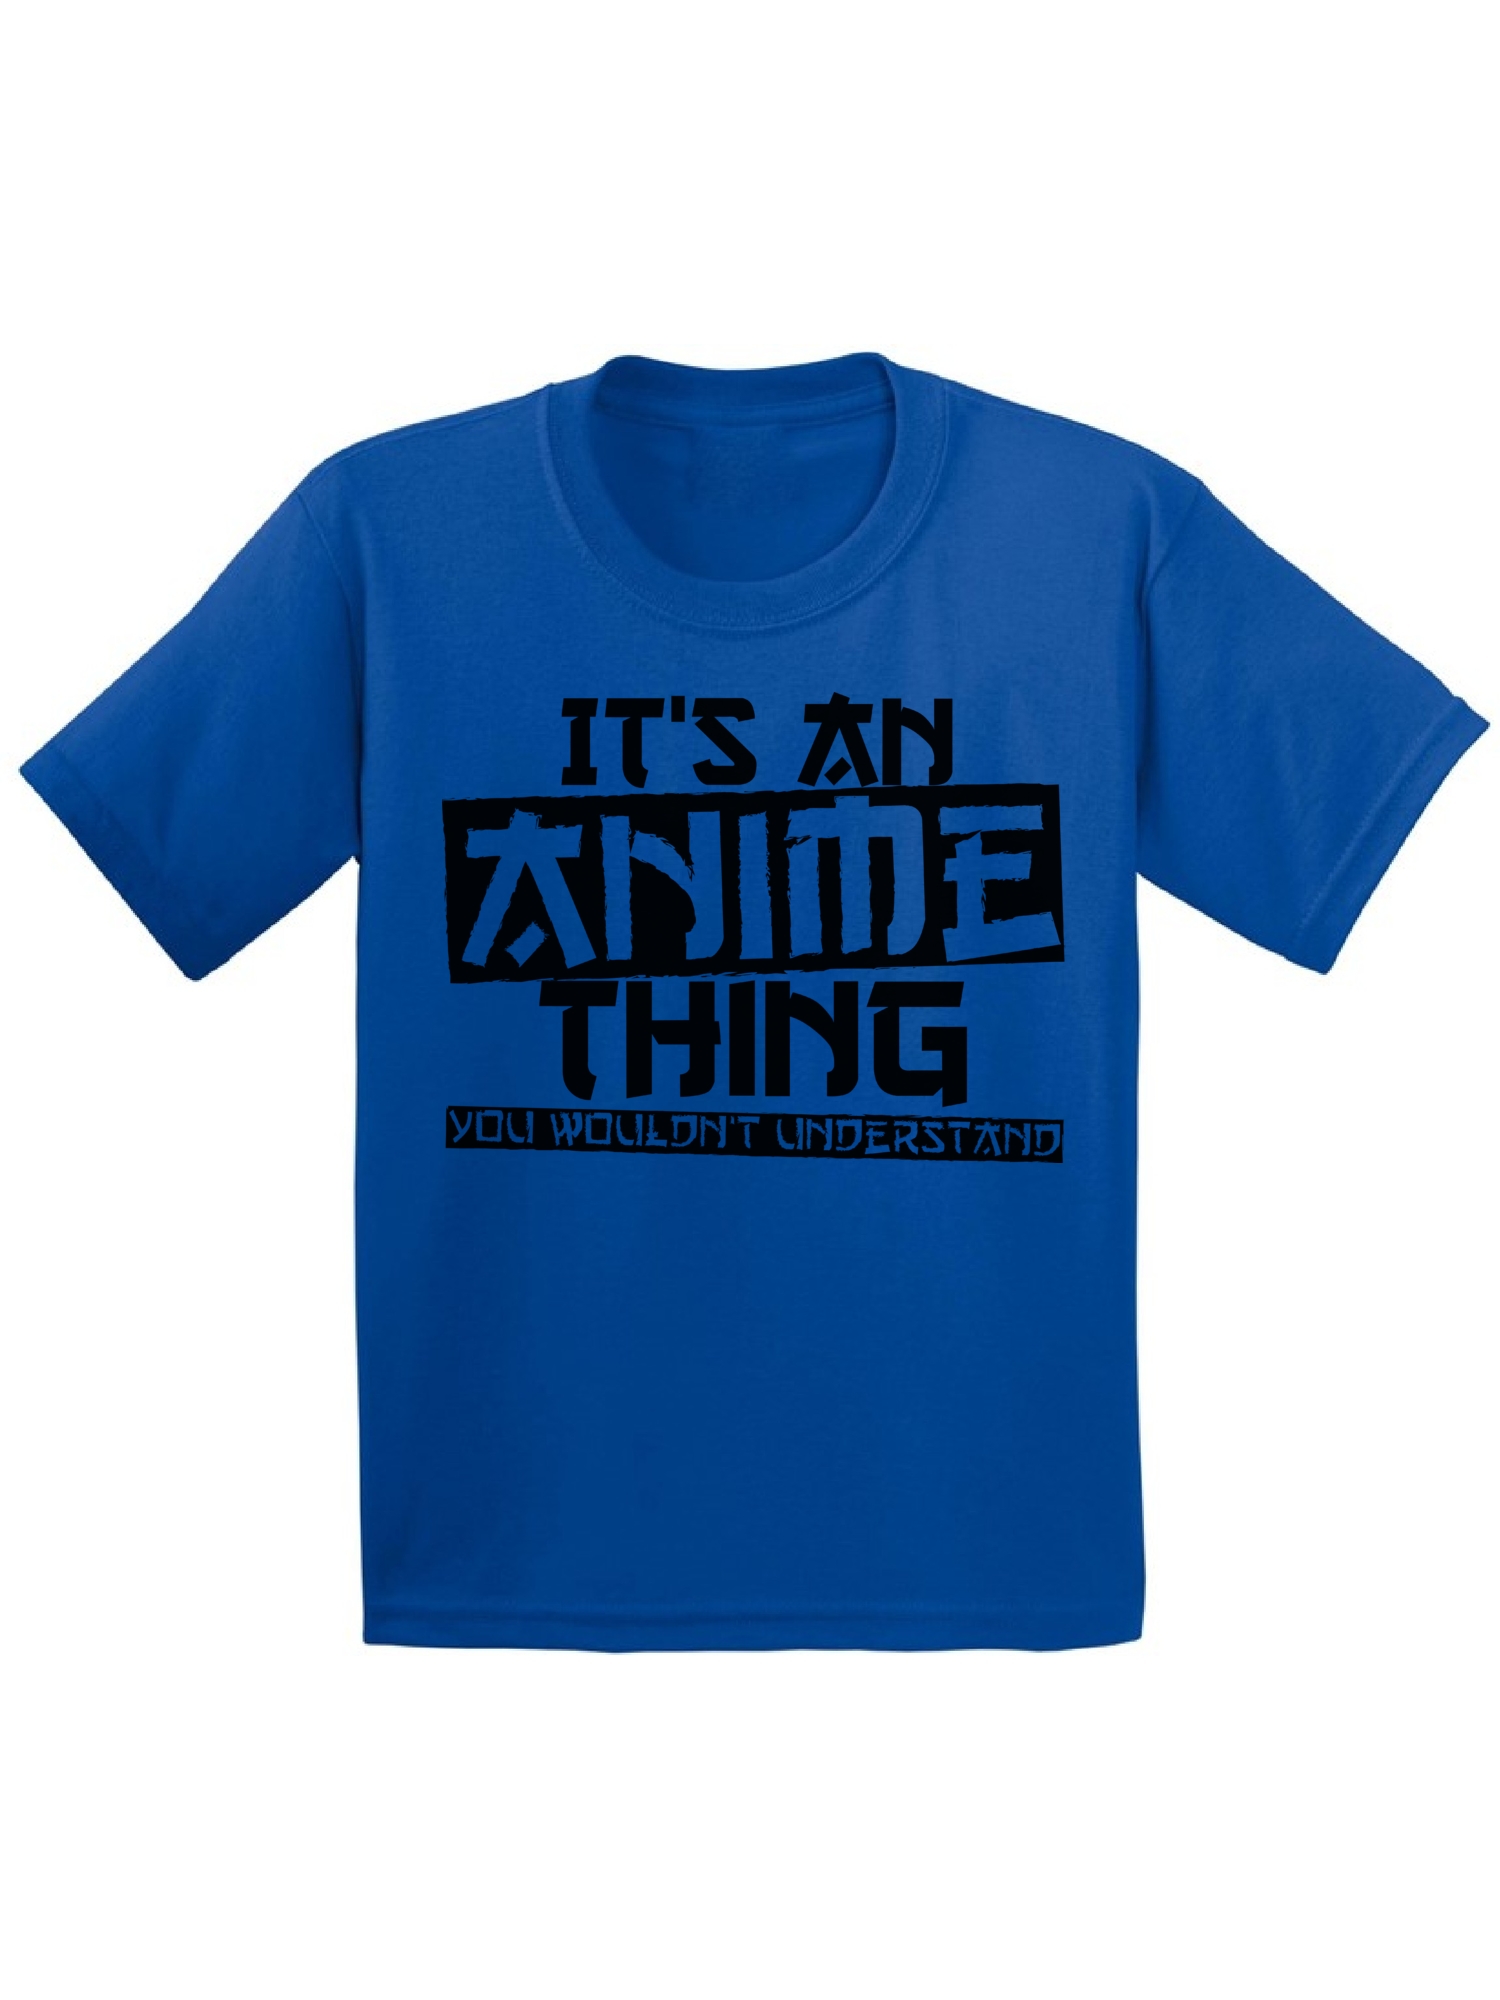 Funny Anime Youth Shirt for Girls Anime Thing T-Shirt Kids Cosplay Tees for Boys Its An Anime Thing You Wouldn't Understand Top Animation Fans - image 1 of 4